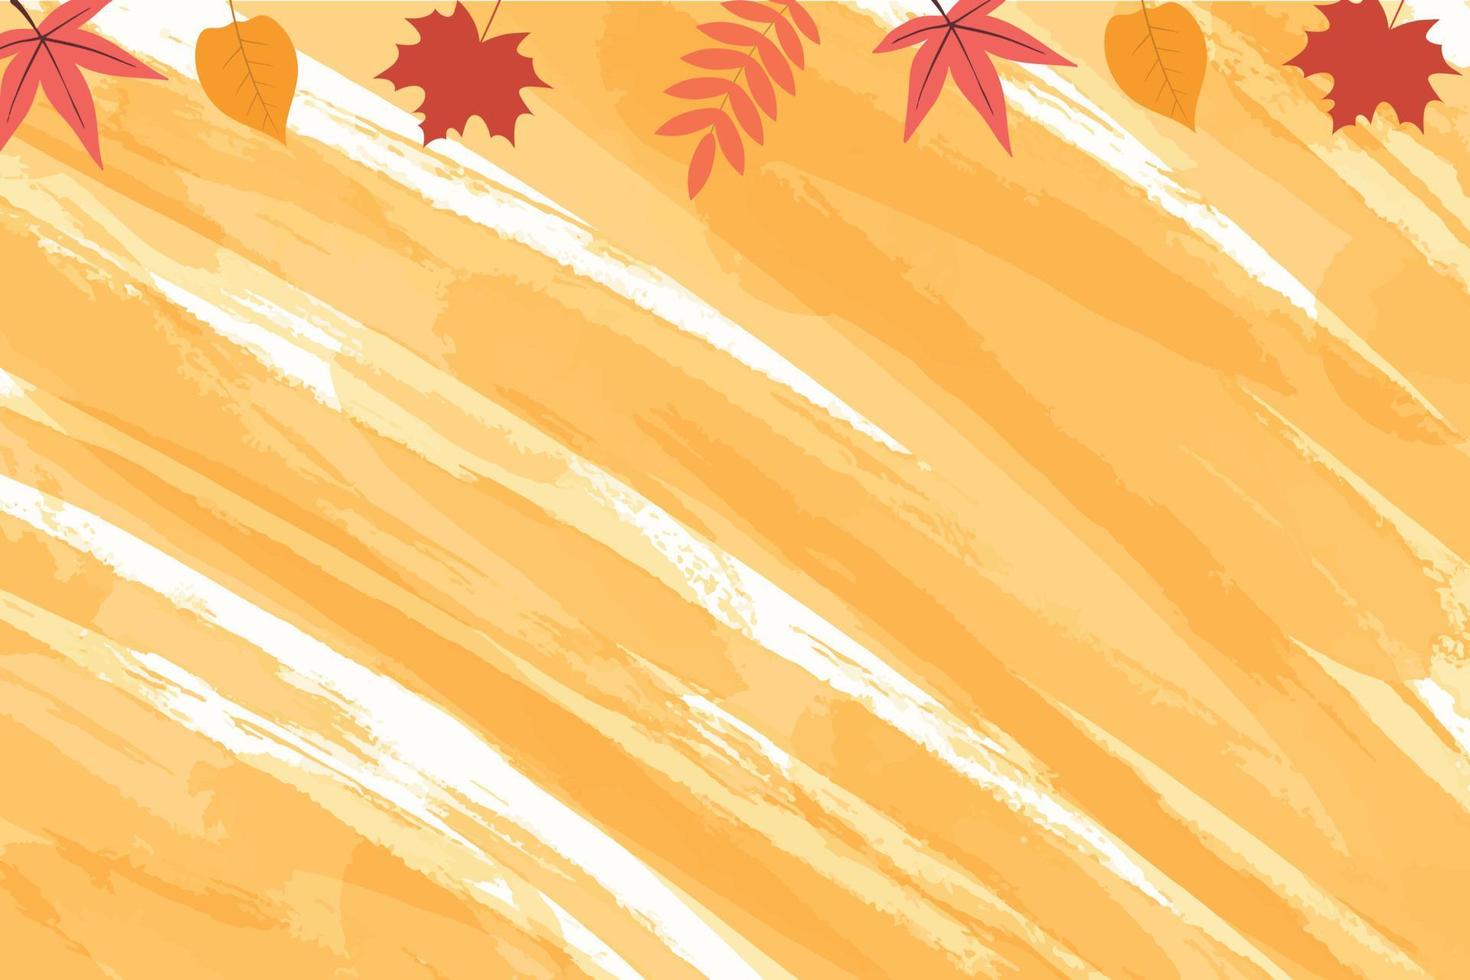 Abstract floral illustration. Background with falling autumn leaves vector